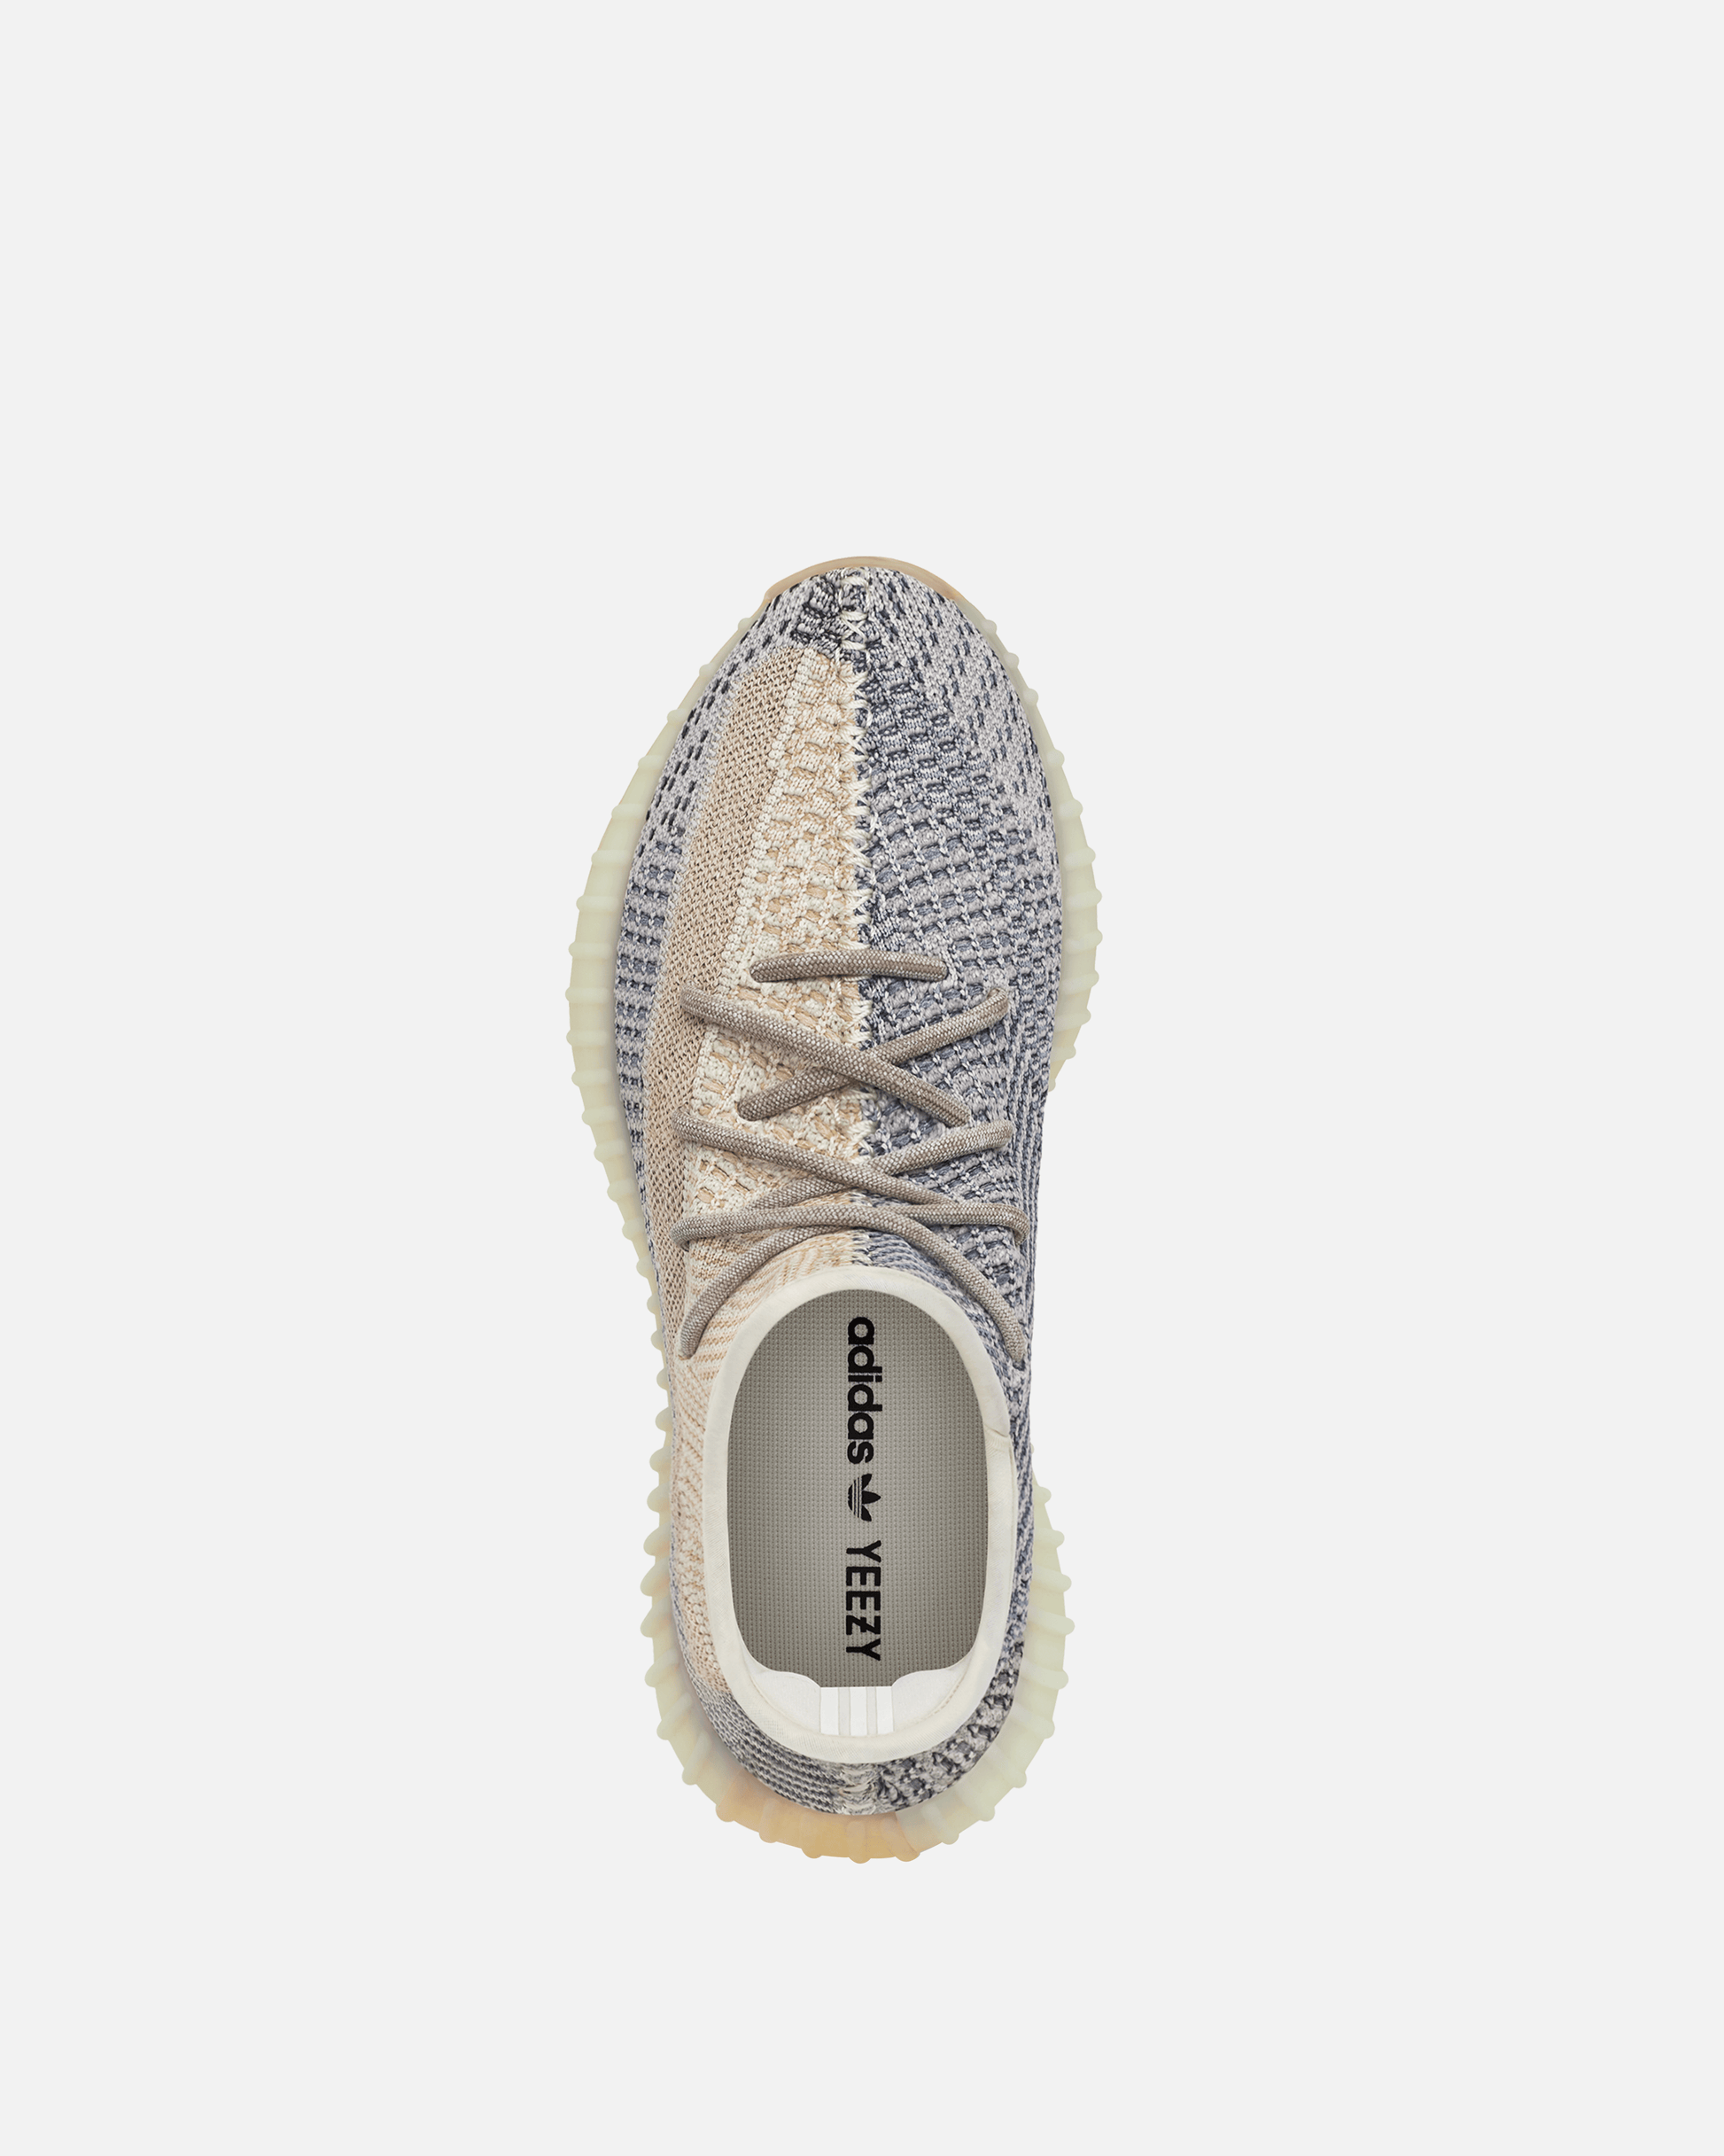 Adidas Releases Yeezy 350 V2 'Ash Pearl'